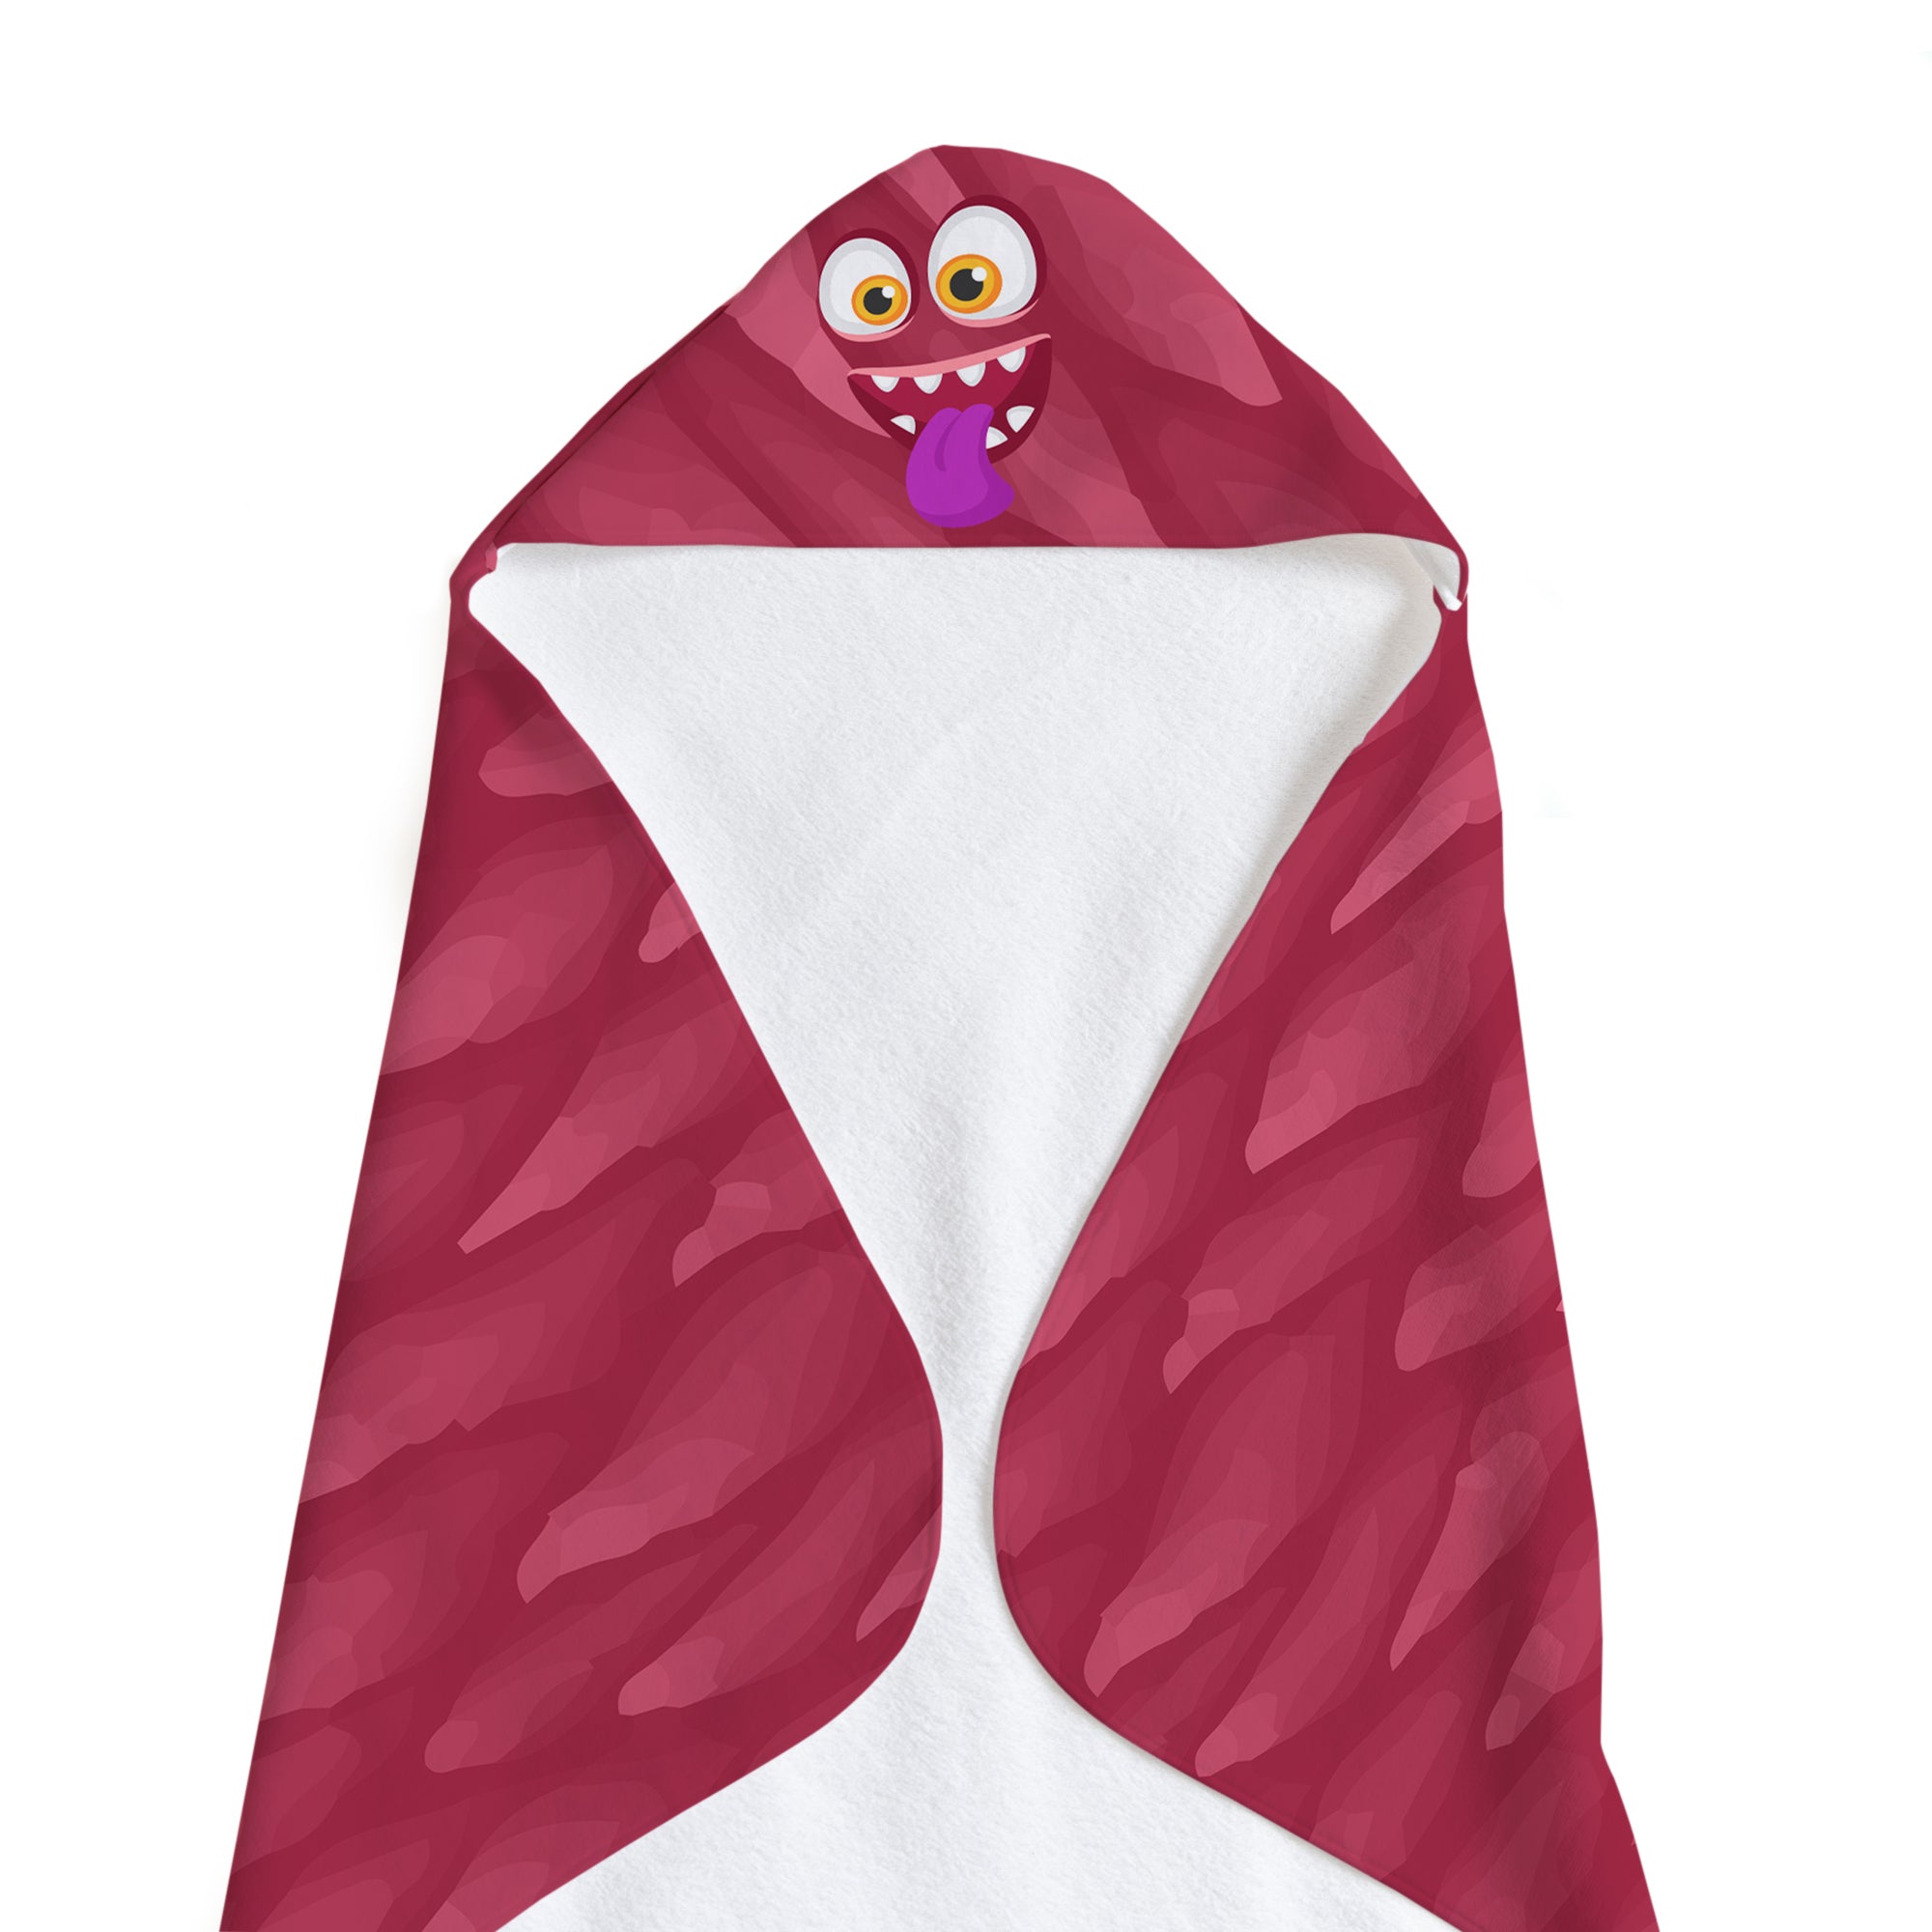 Buy this Red Monster Soft and Absorbent Hooded Baby Towel